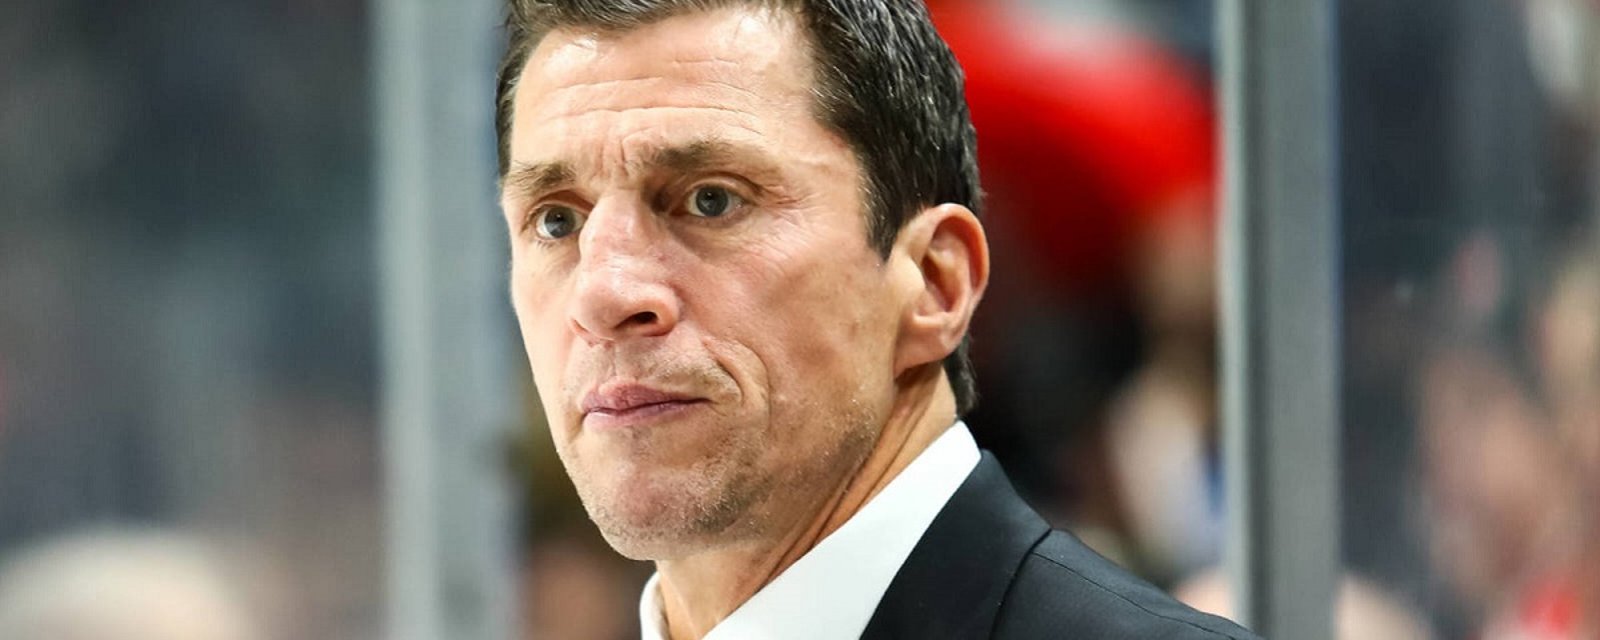 Rumor: Hurricanes and Rod Brind'Amour closing in on 3 year extension.